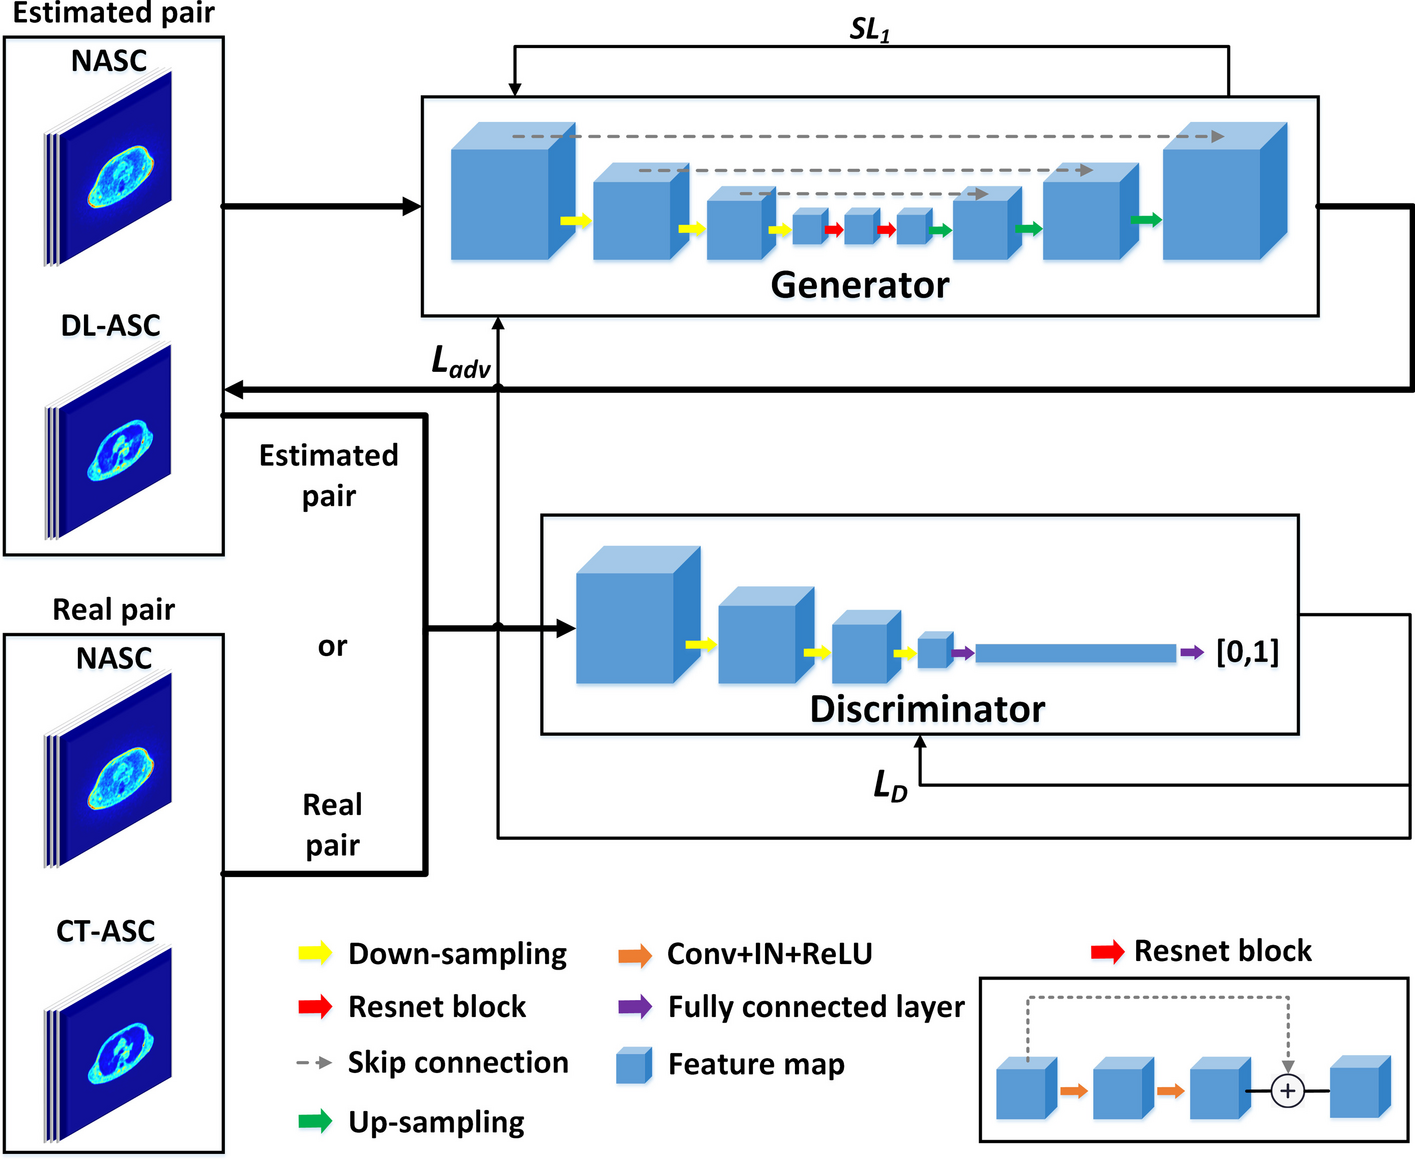 Artificial intelligence-based joint attenuation and scatter correction strategies for multi-tracer total-body PET